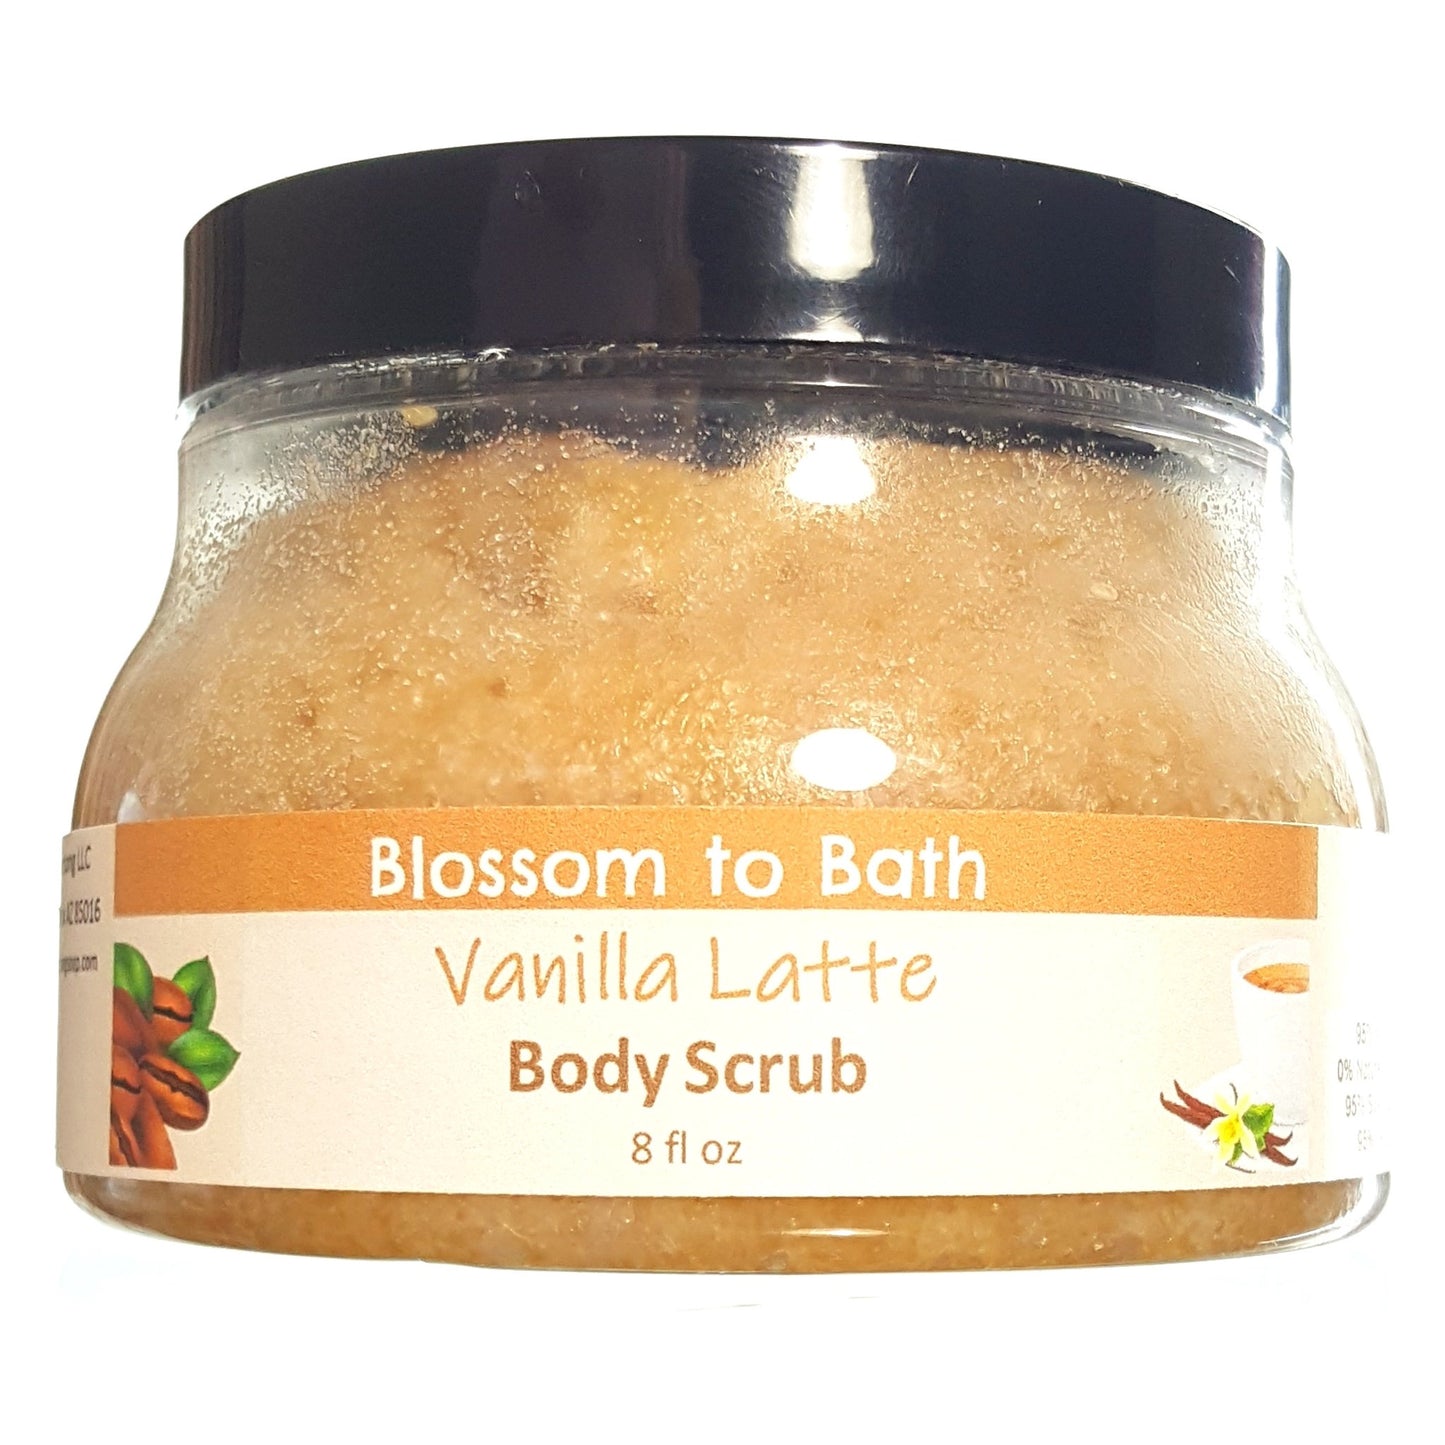 Buy Blossom to Bath Vanilla Latte Body Scrub from Flowersong Soap Studio.  Large crystal turbinado sugar plus  rich oils conveniently exfoliate and moisturize in one step  Sweetened vanilla combines with rich coffee to form the classic latte scent.